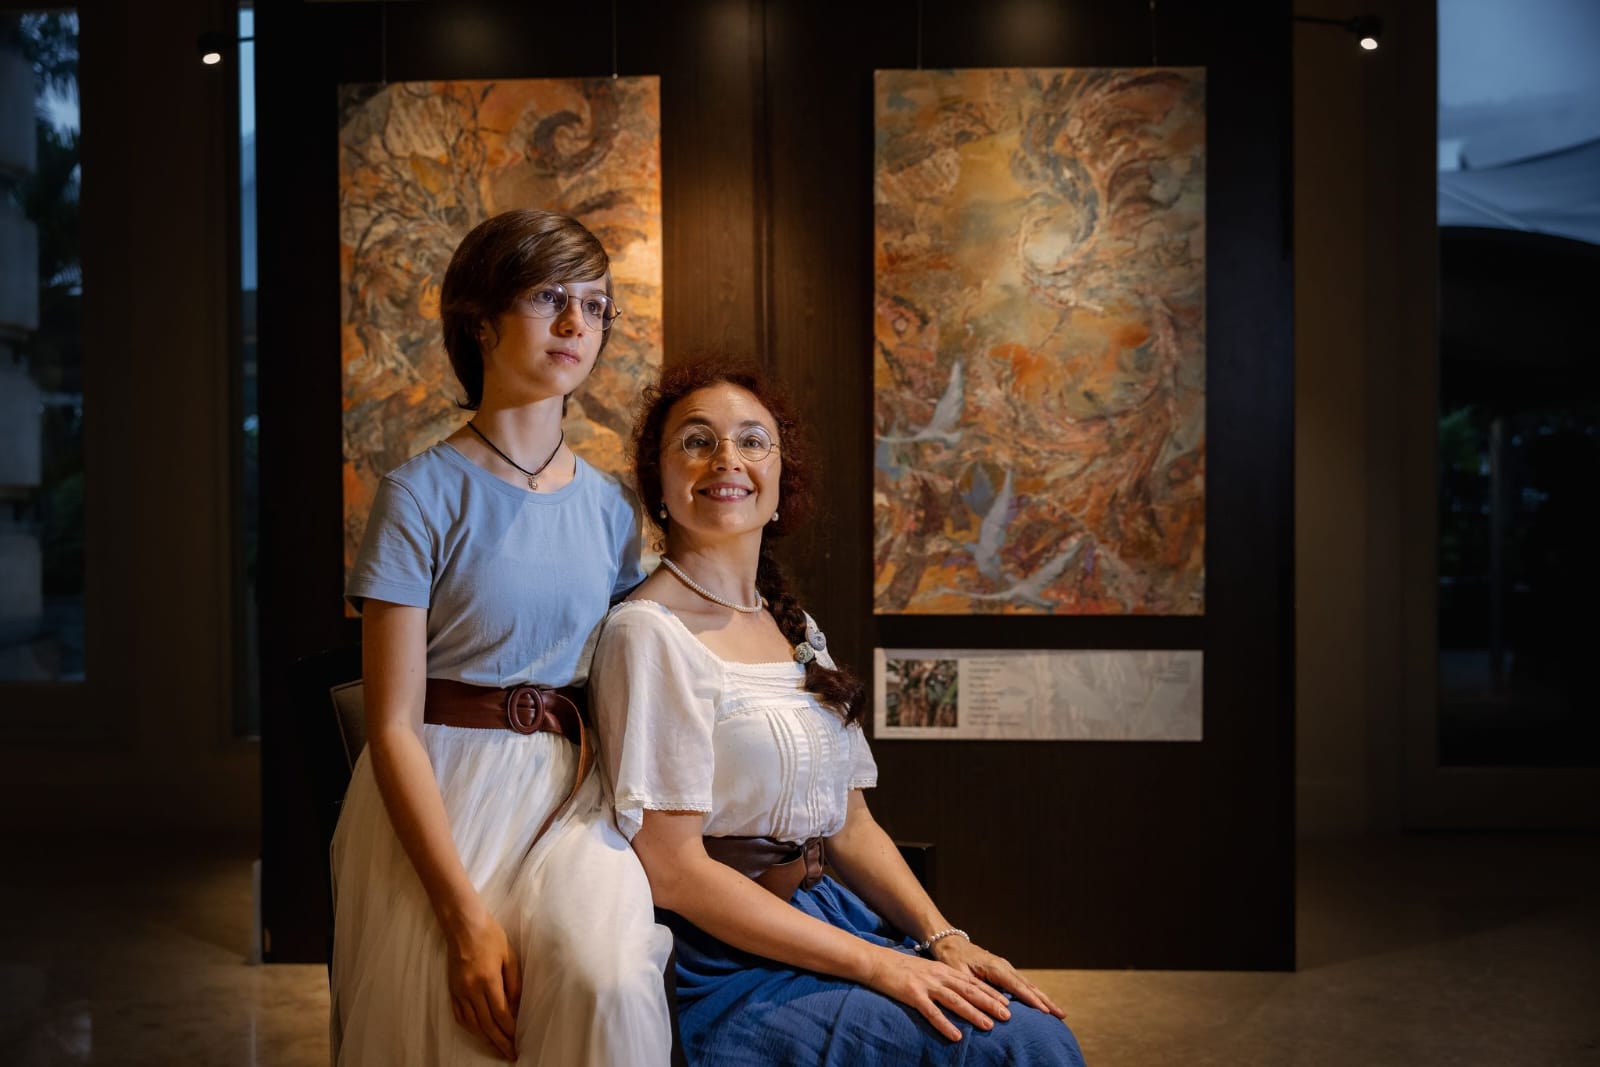 Inessa and Alice Kalabekova exhibition Nature of Art at The Fullerton Hotel Singapore